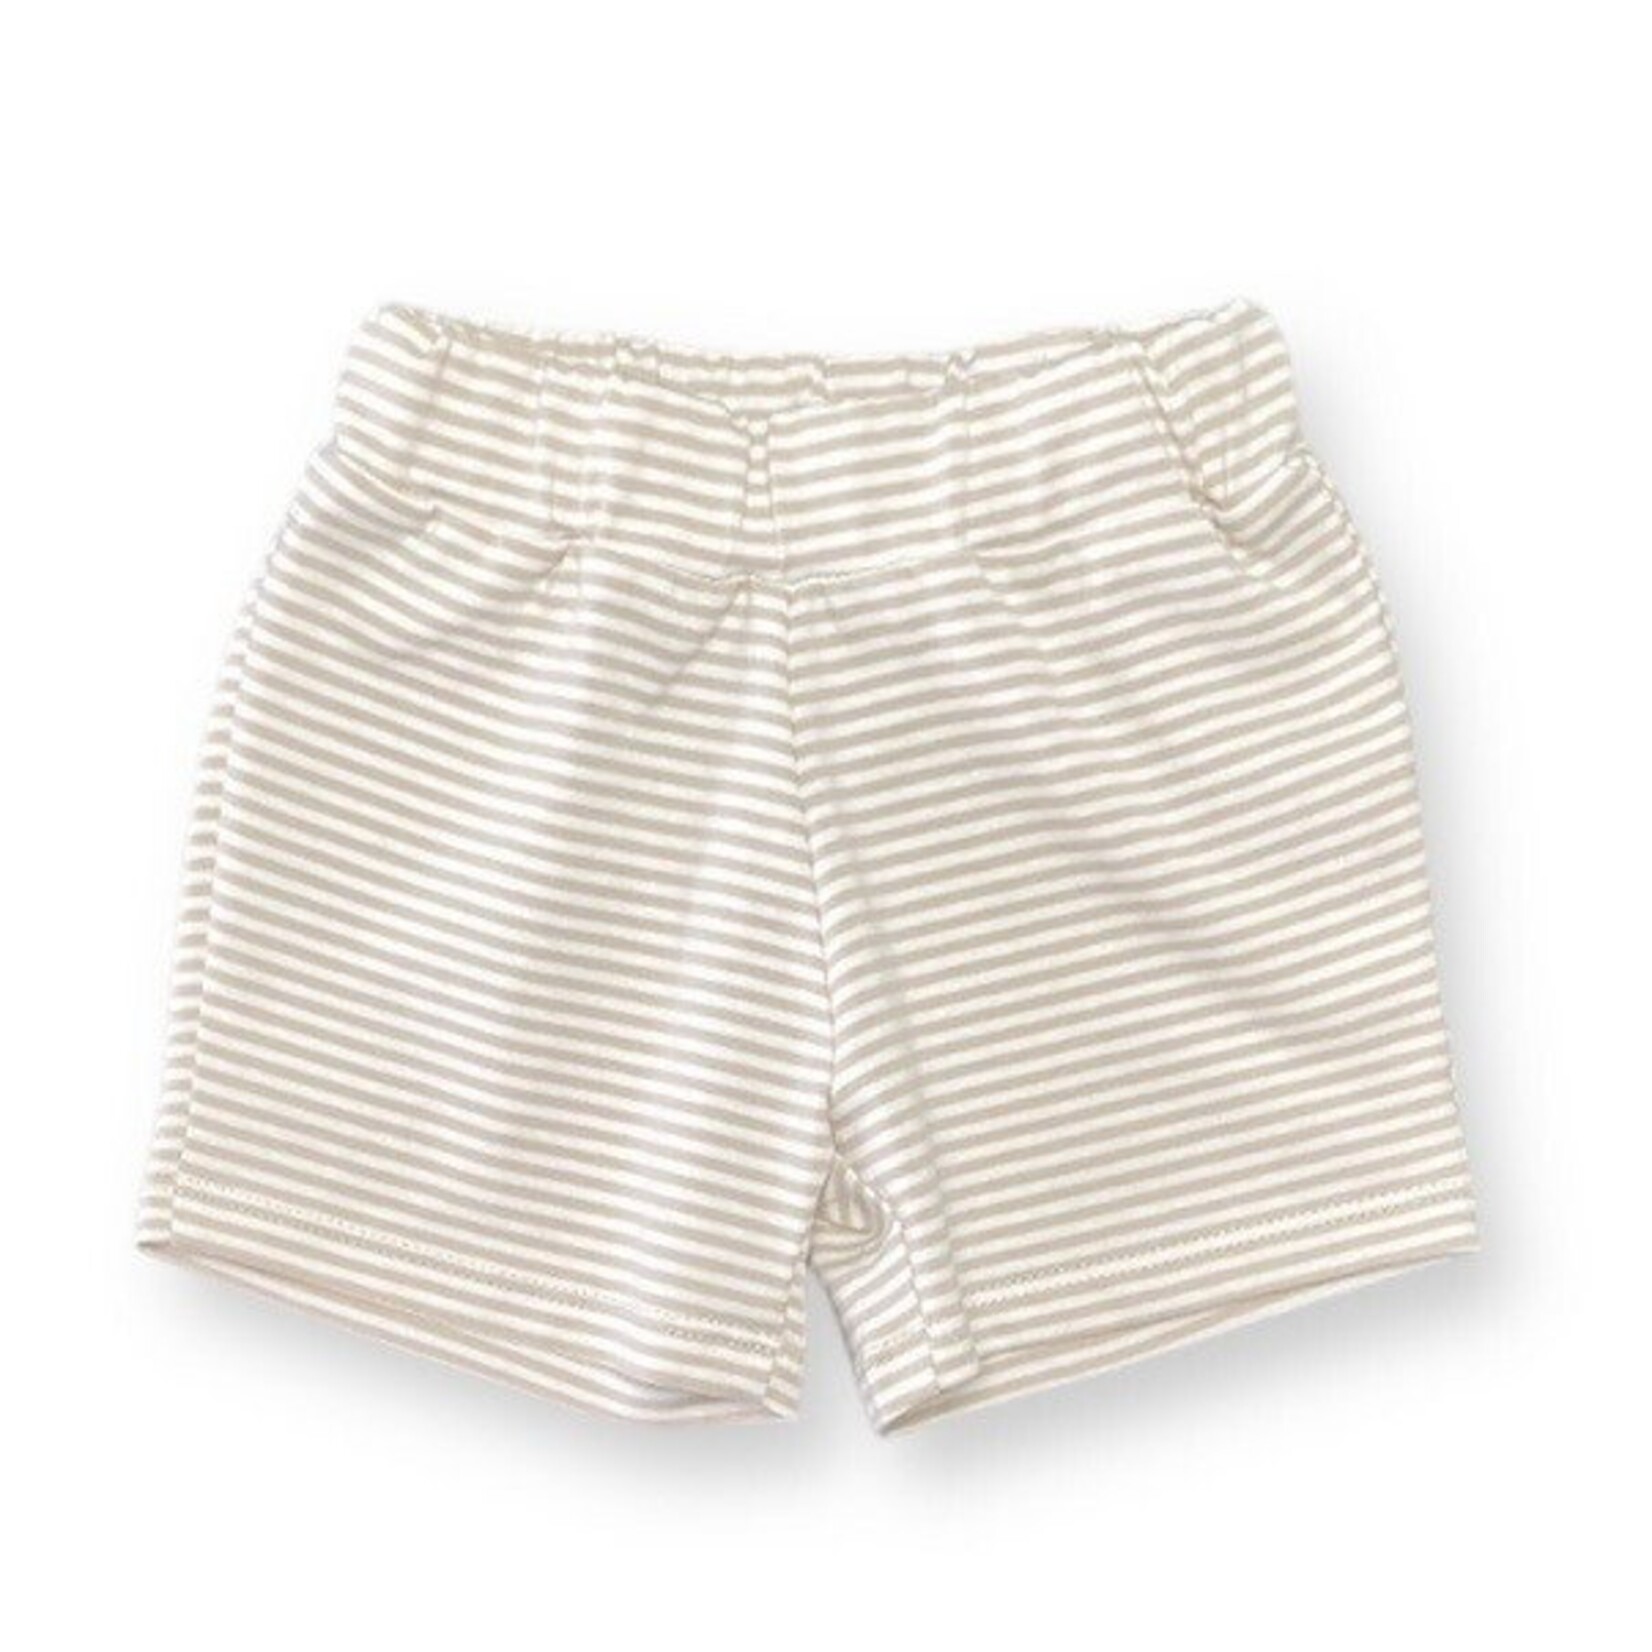 Feathers® Shorts small stripes ivory